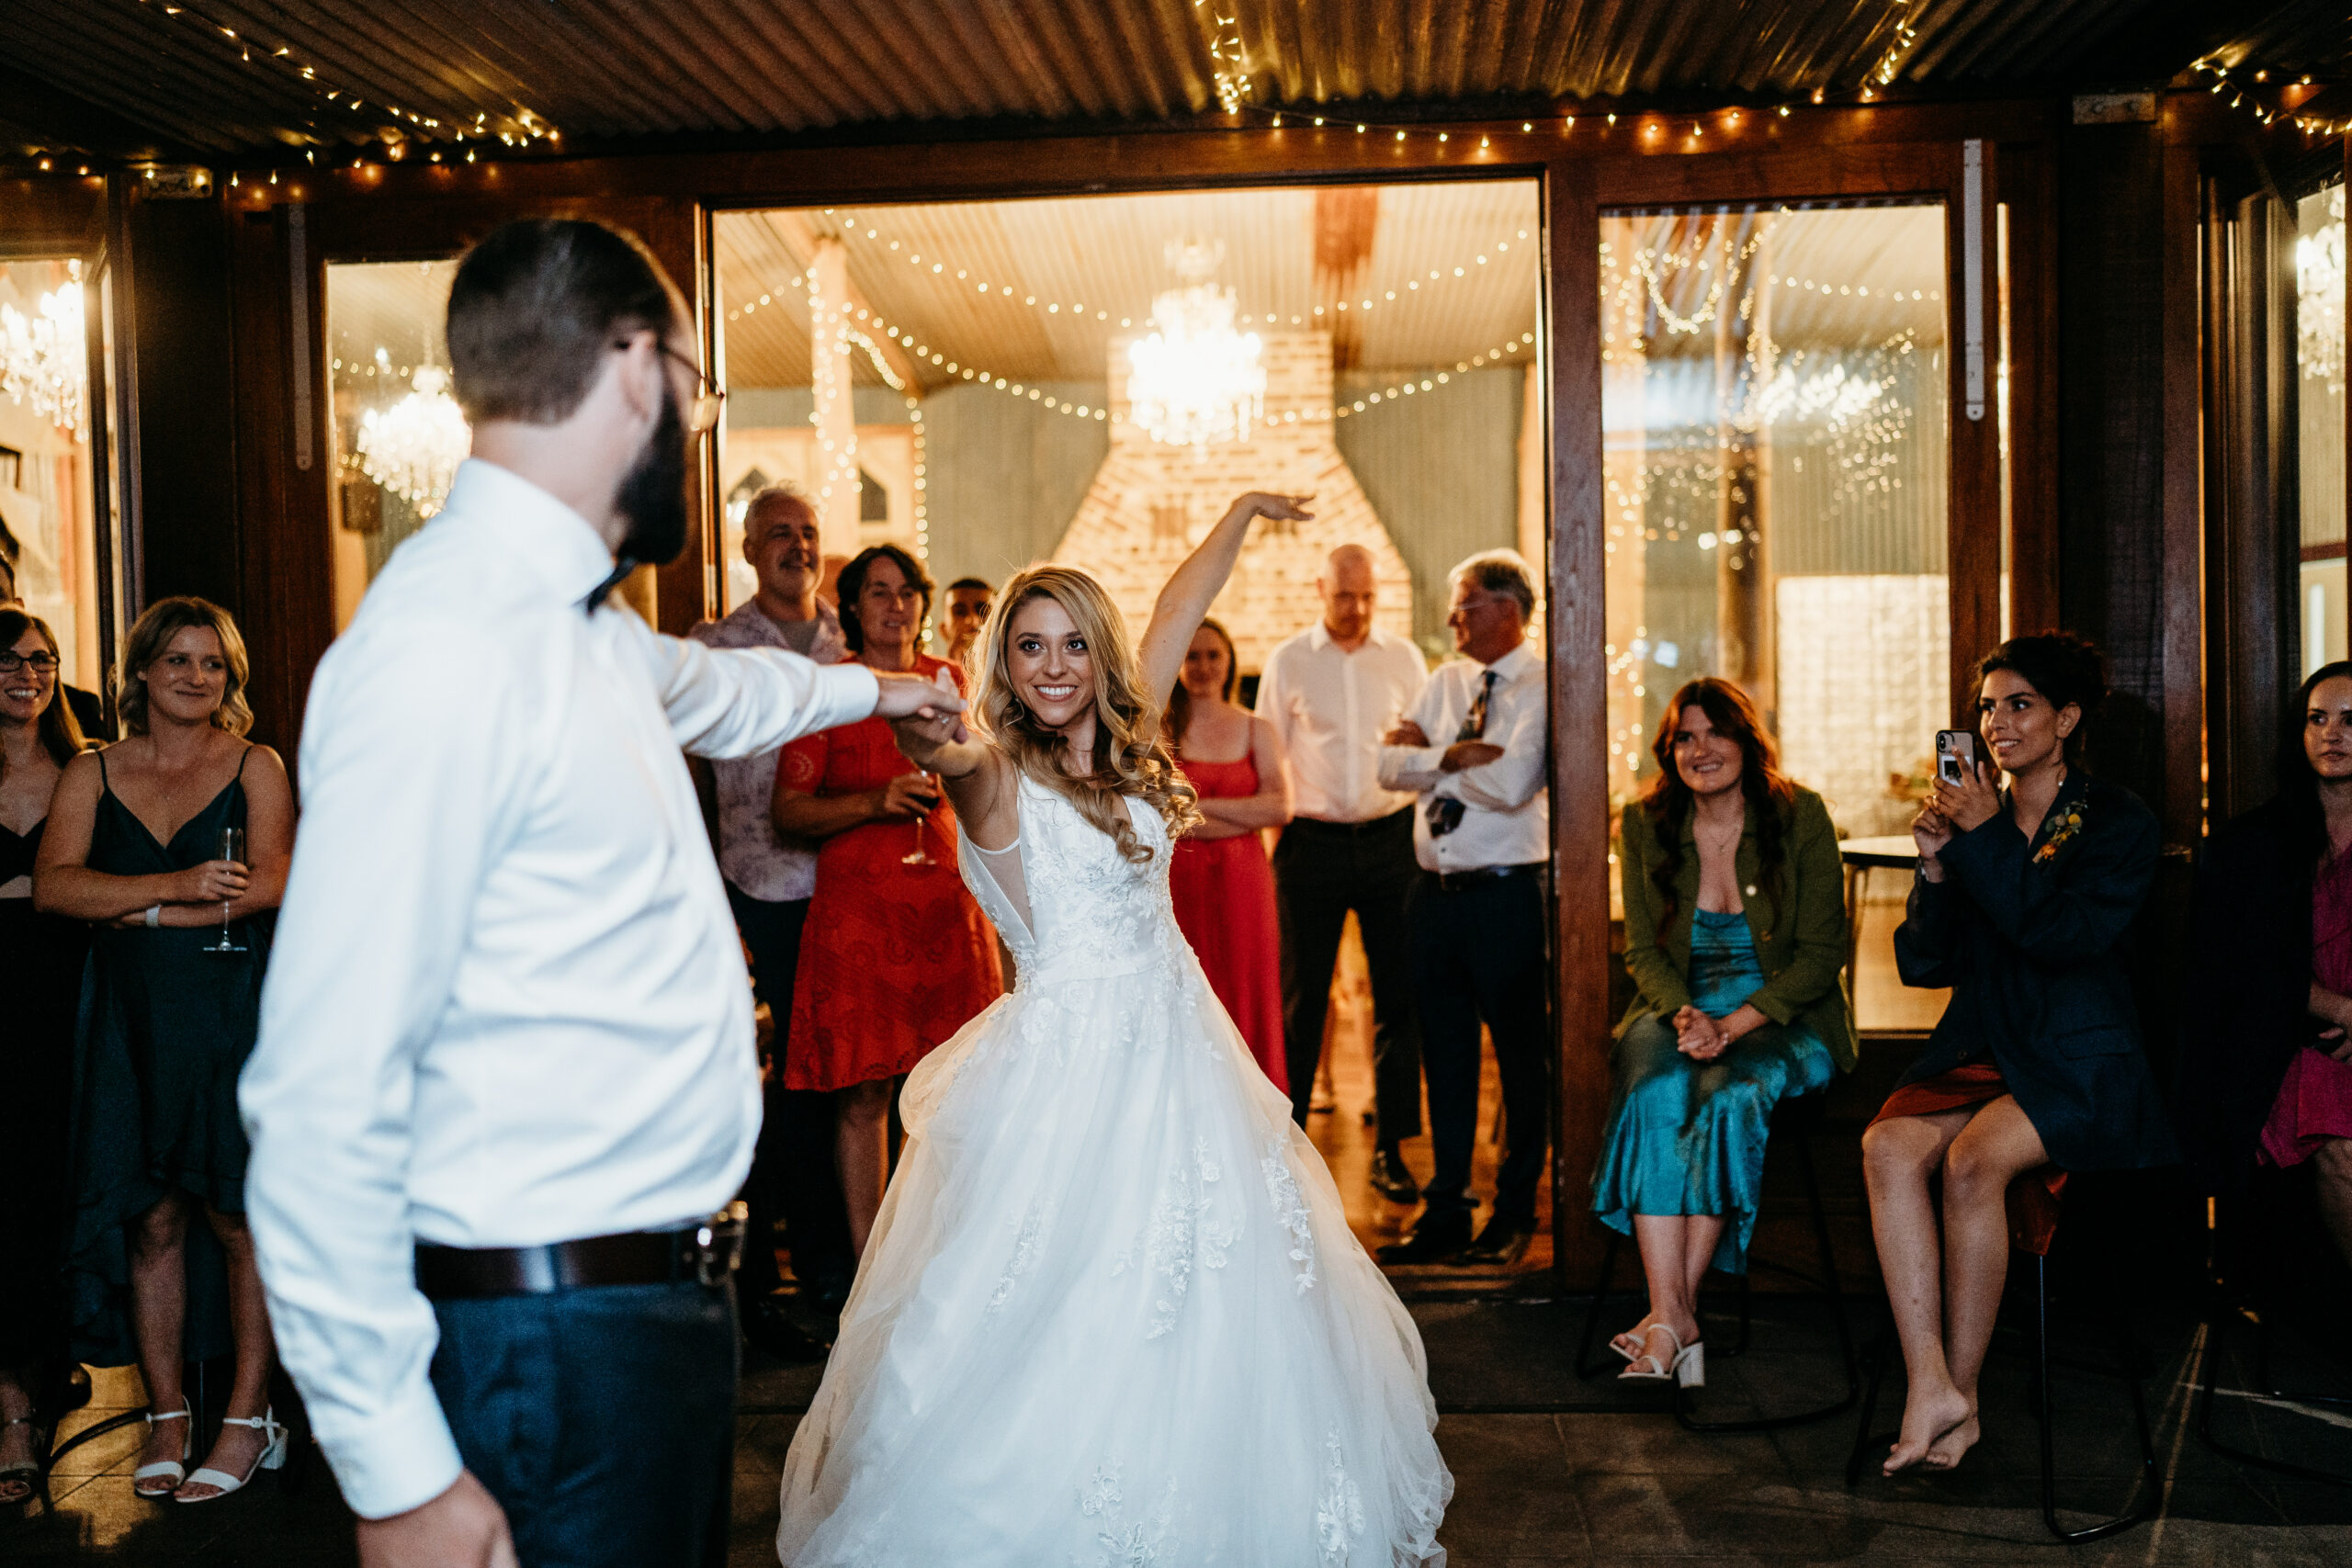 First dance of the bride and groom in a warmly lit reception hall, with guests surrounding them